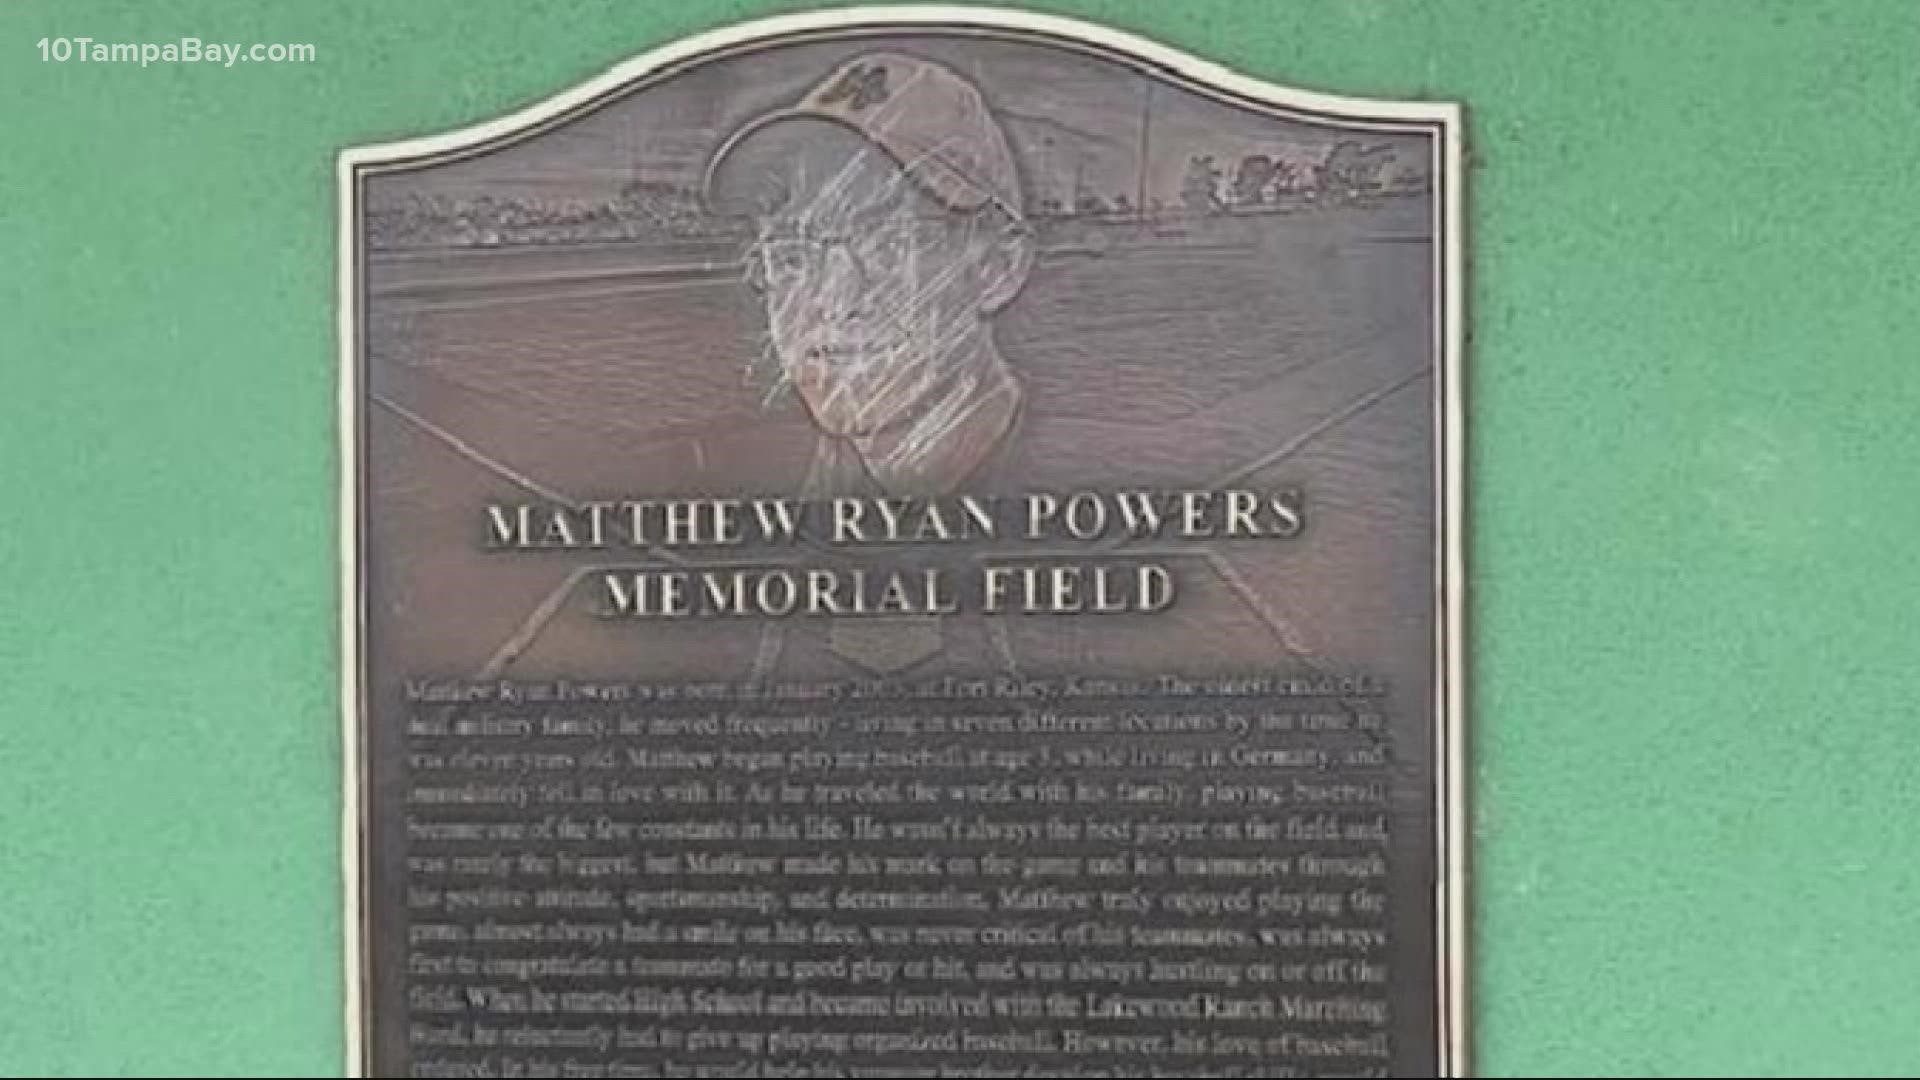 Anyone with information on who damaged the Matthew Ryan Powers Memorial Field plaque is asked to call the sheriff's office.